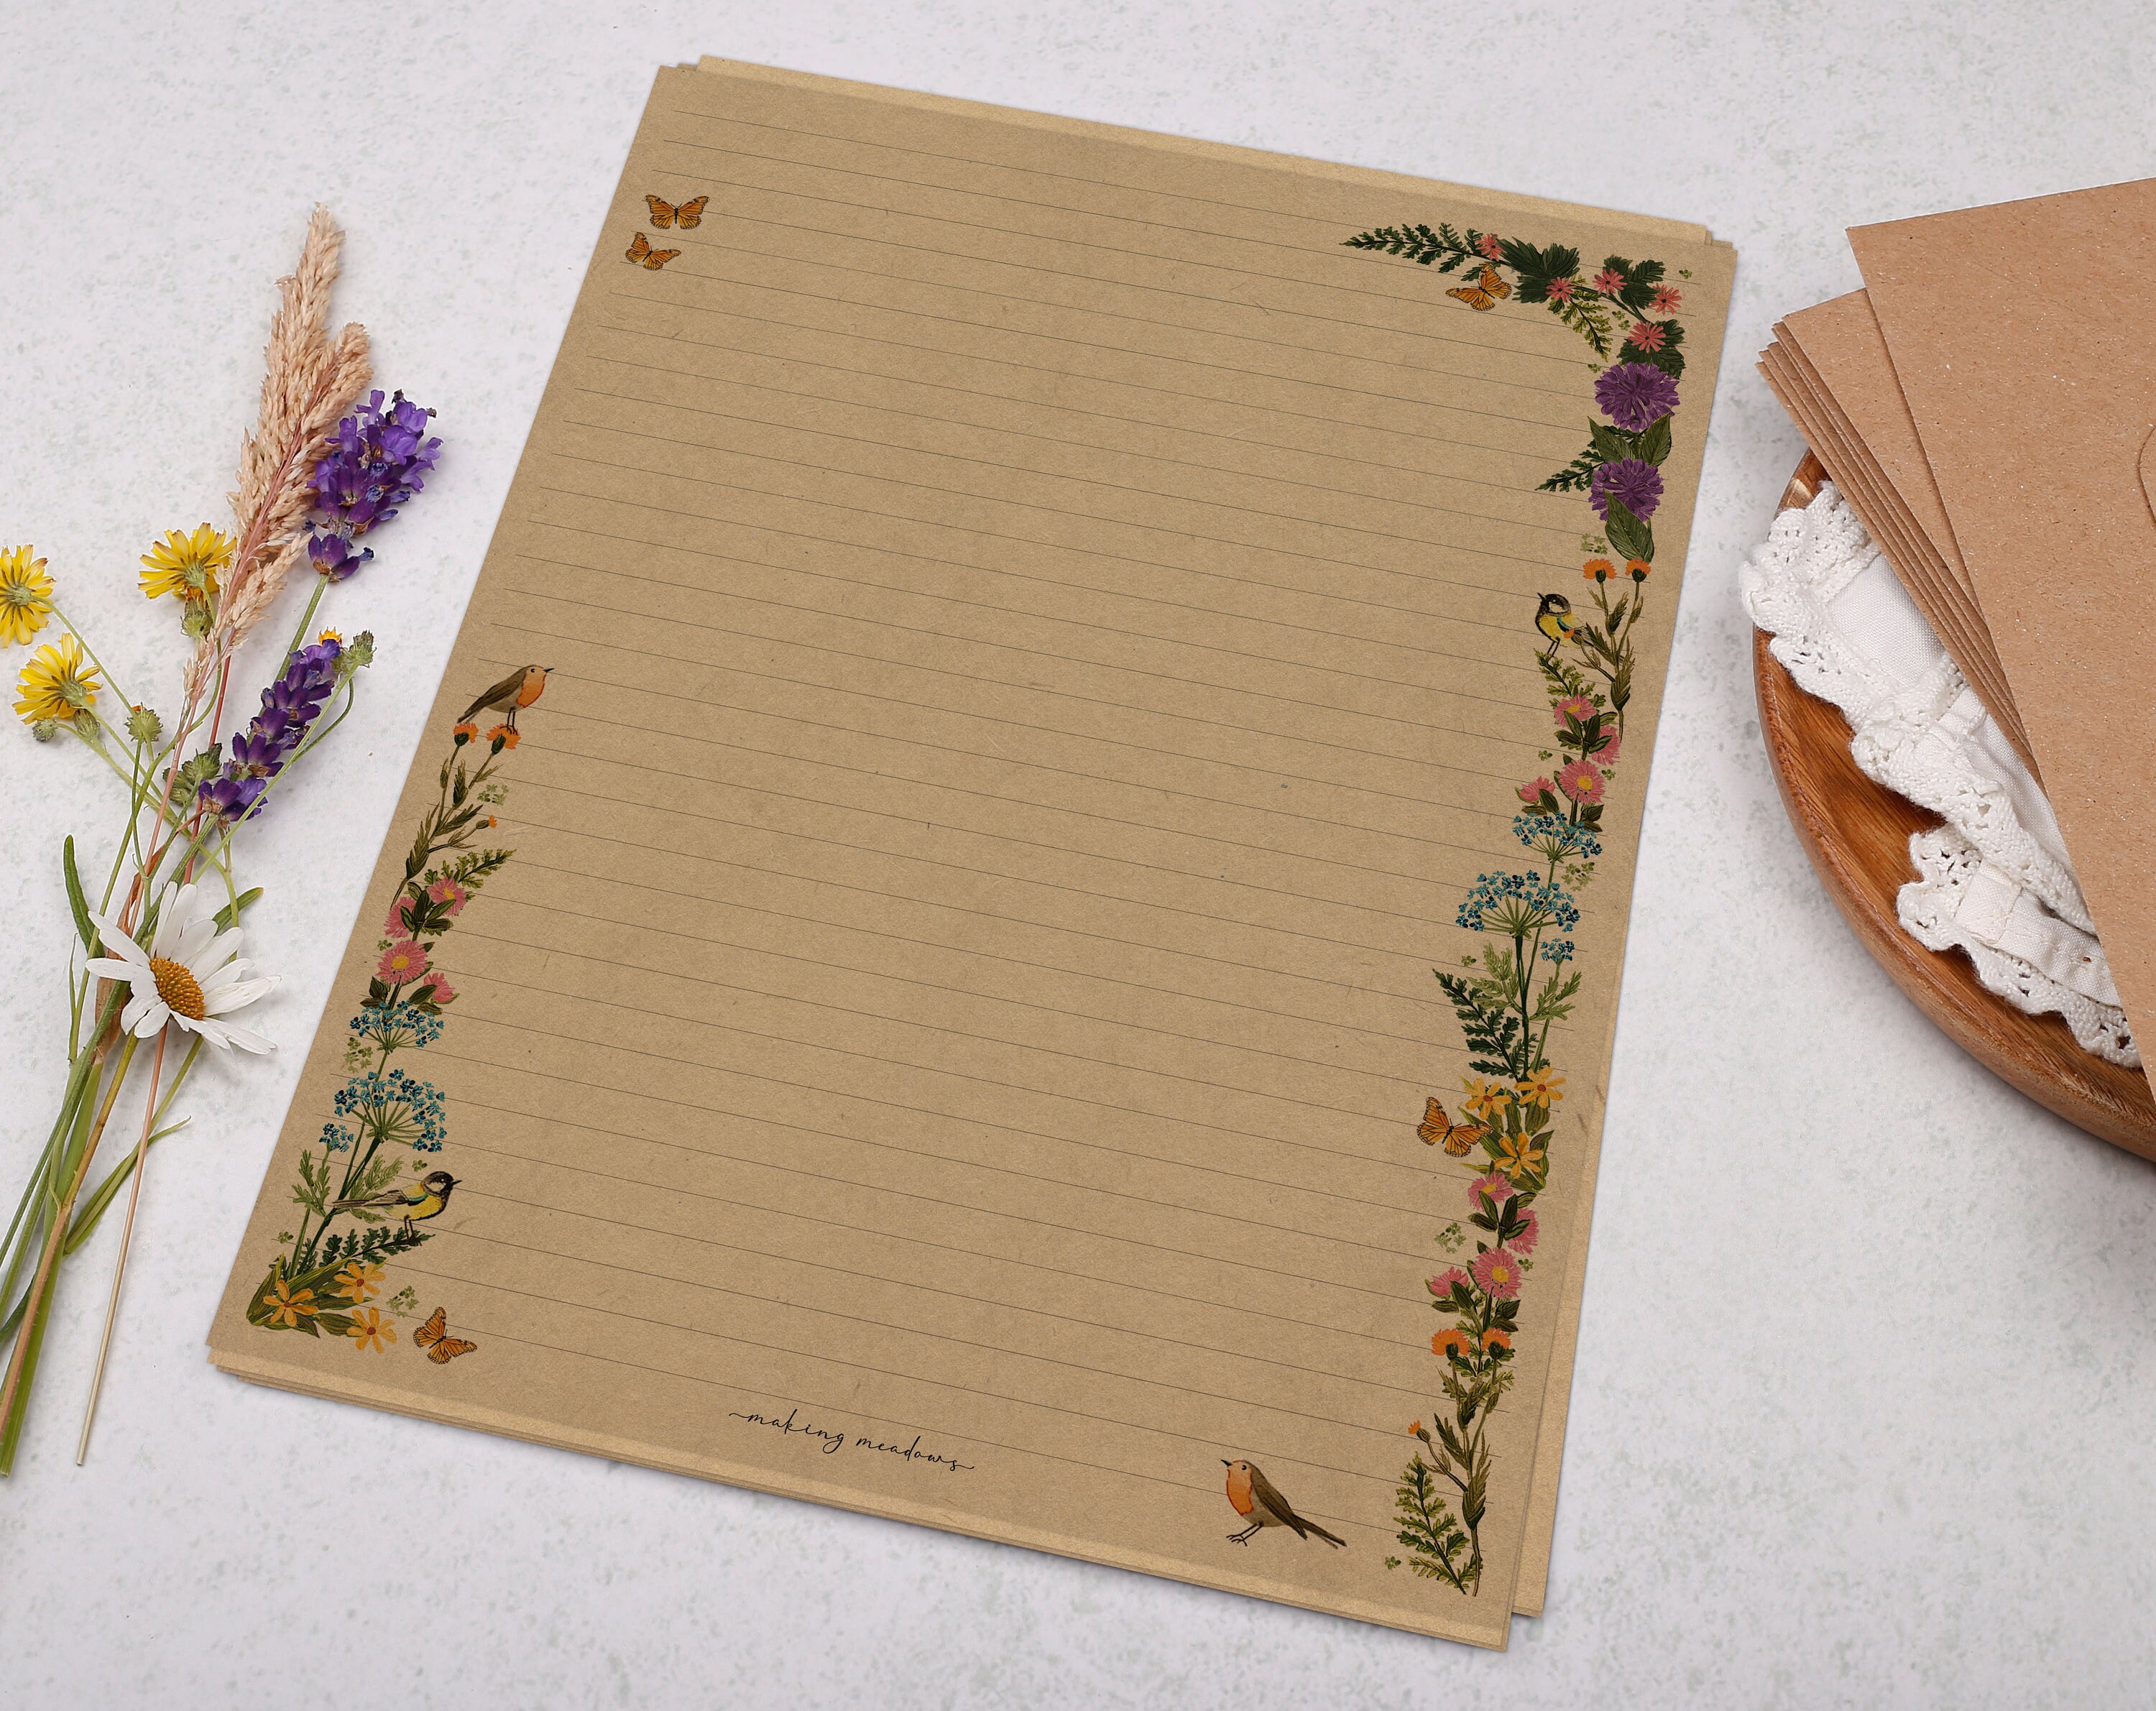 A4 Kraft Letter Writing Paper Sheets | Botanical Foliage Garden Border |  Lined or Unlined Paper | Stationery Gift or Thoughtful Present